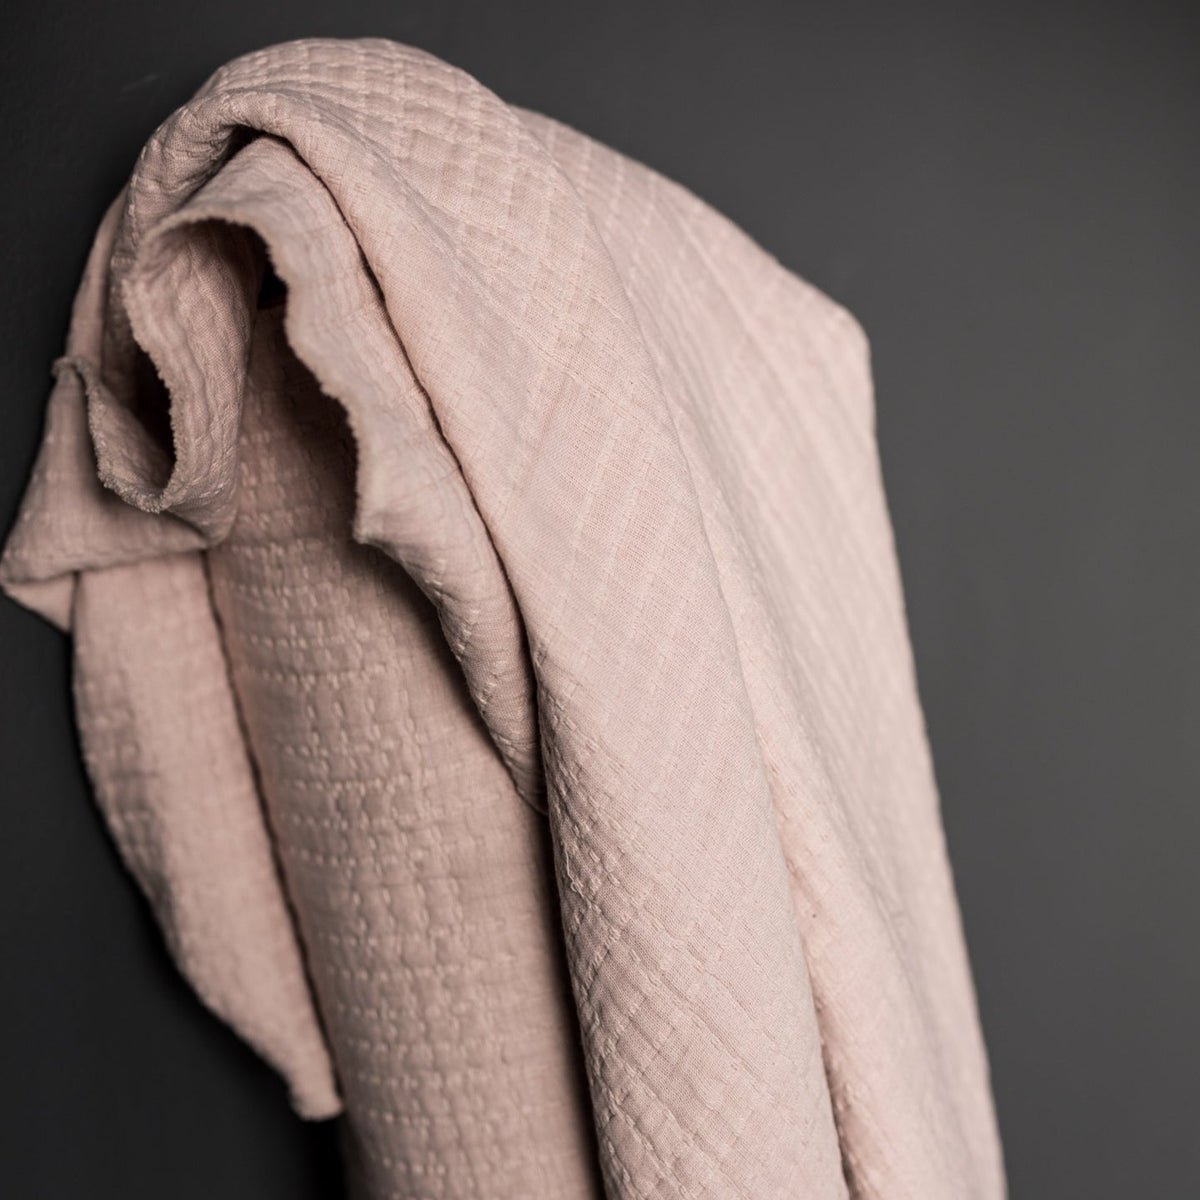 Soft Stitch Jacquard Cotton in Peony | Merchant & Mills designer sewing fabric | Stitch Piece Loop | Online Fabric & Sewing Supplies | A carefully curated range focusing on ethically produced & sustainable fabrics of the highest quality, perfect for the modern & considered sewist’s memade wardrobe | Australia